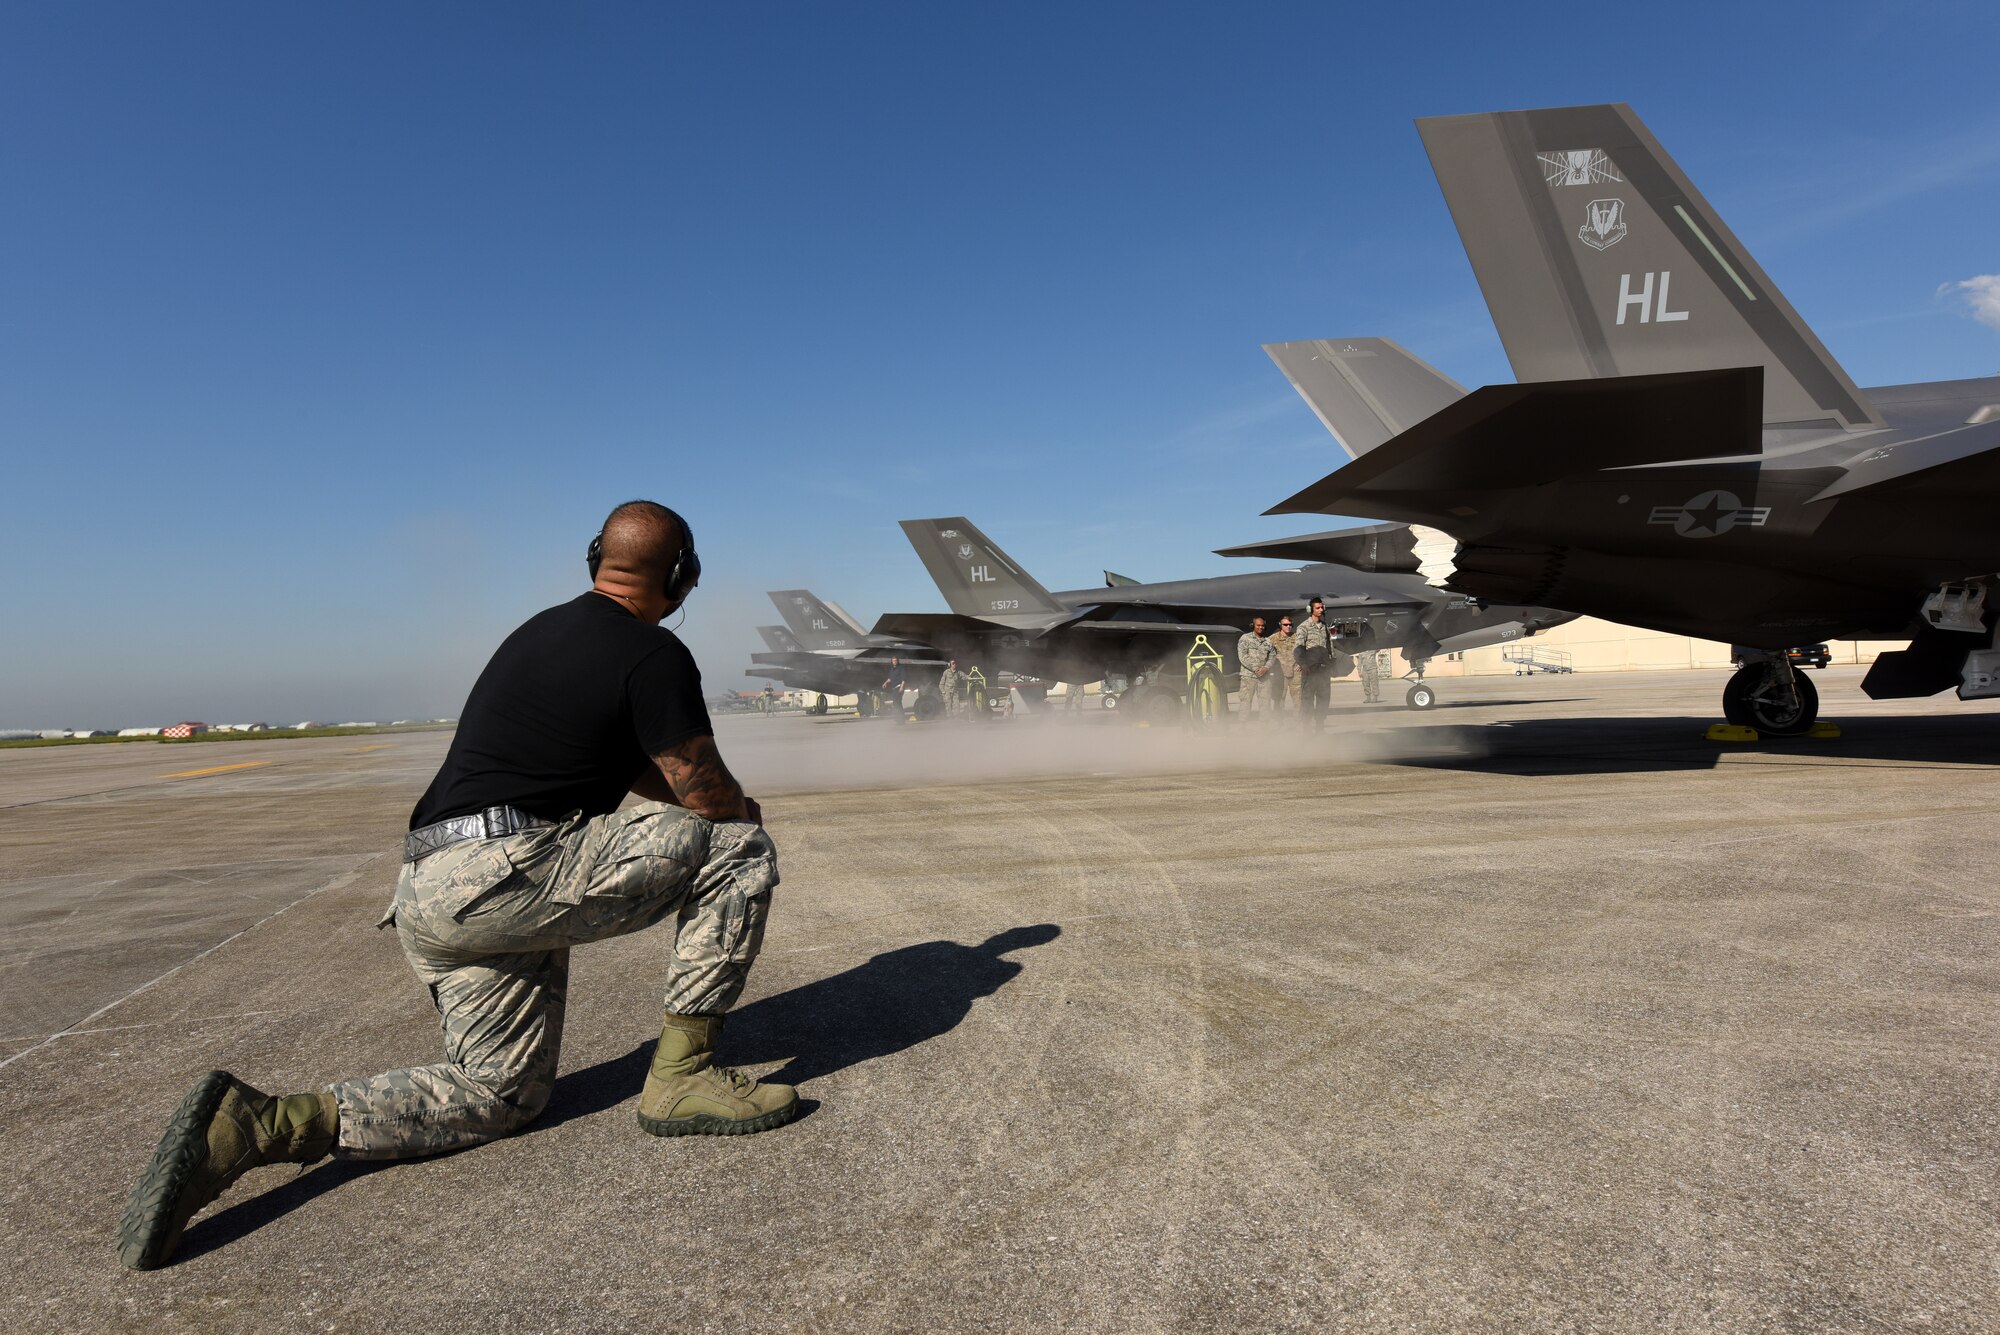 Staff Sgt. Keagan Rosario, 421st Aircraft Maintenance Unit BOLT mission systems technician, performs preflight checks on an F-35A Lightning II fighter jet May 31, 2019, at Aviano Air Base. The F-35A is an agile, versatile, high-performance, 9G capable multirole fighter that combines stealth, sensor fusion and unprecedented situational awareness. Airmen from the 388th and 419th Fighter Wings at Hill Air Force Base, Utah, are in Europe as part of a Theater Security Package. Currently they are participating in Astral Knight 2019, a joint and multinational exercise that involves airmen, soldiers and sailors from the United States and airmen from Croatia, Italy, and Slovenia. The exercise is an integrated air and missile defense exercise focused on conducting integrated defense of key terrain. (U.S. Air Force photo by Tech. Sgt. Jim Araos)